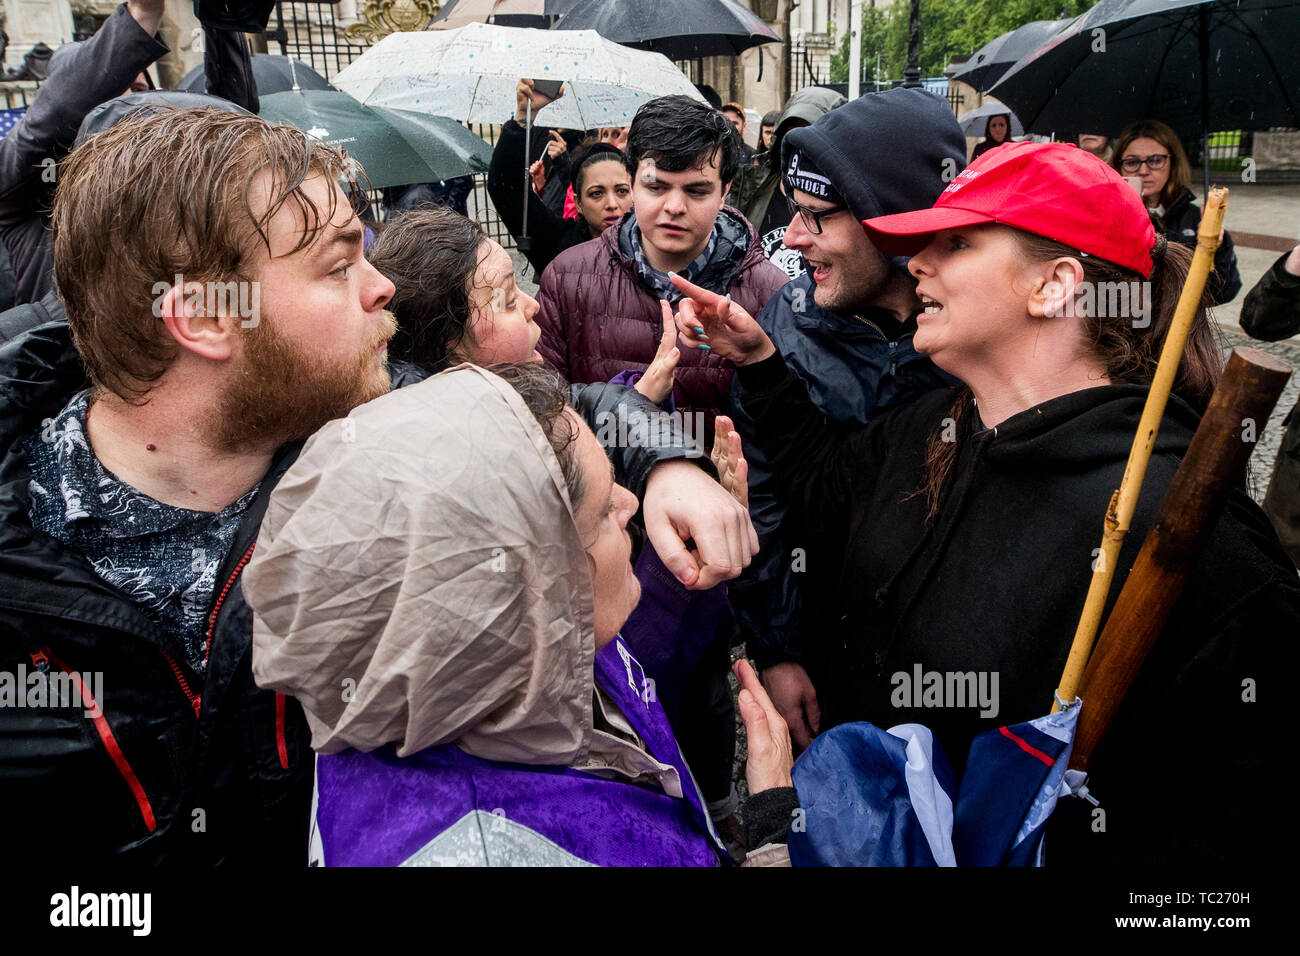 Former Belfast Councillor Jolene Bunting (right) with her partner Wayne Cummings (second from right) speaking with a stewards during a corner protest at a 'Stop Trumpism' rally hosted by ExAct: Expat Action Group NI, at Belfast City Hall. Stock Photo